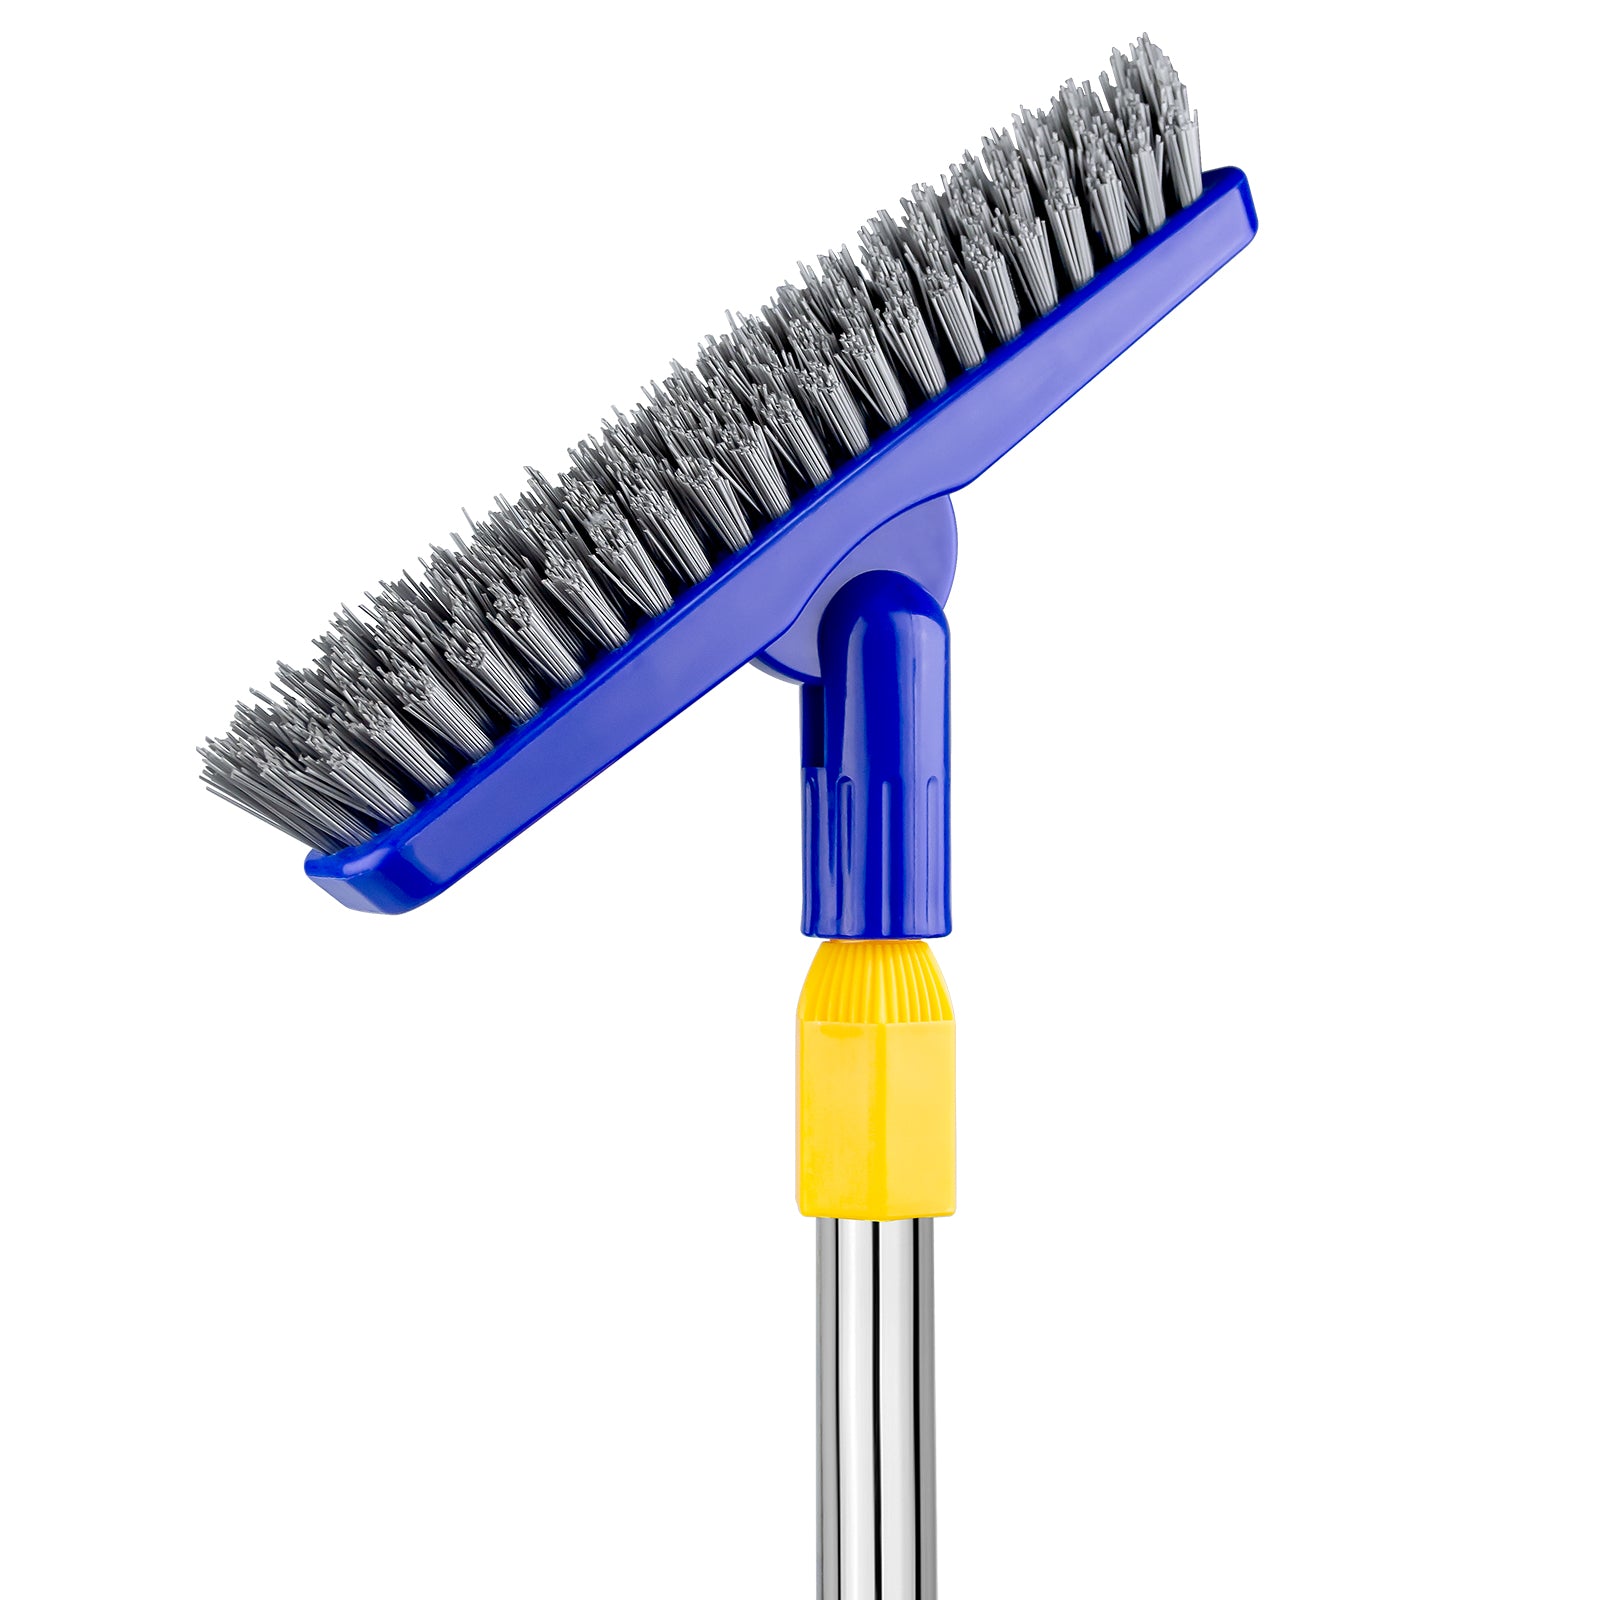 ITTAHO 2 Pack Grout Brush with Long Handle, Swivel Cleaning Grout Line  Scrubber